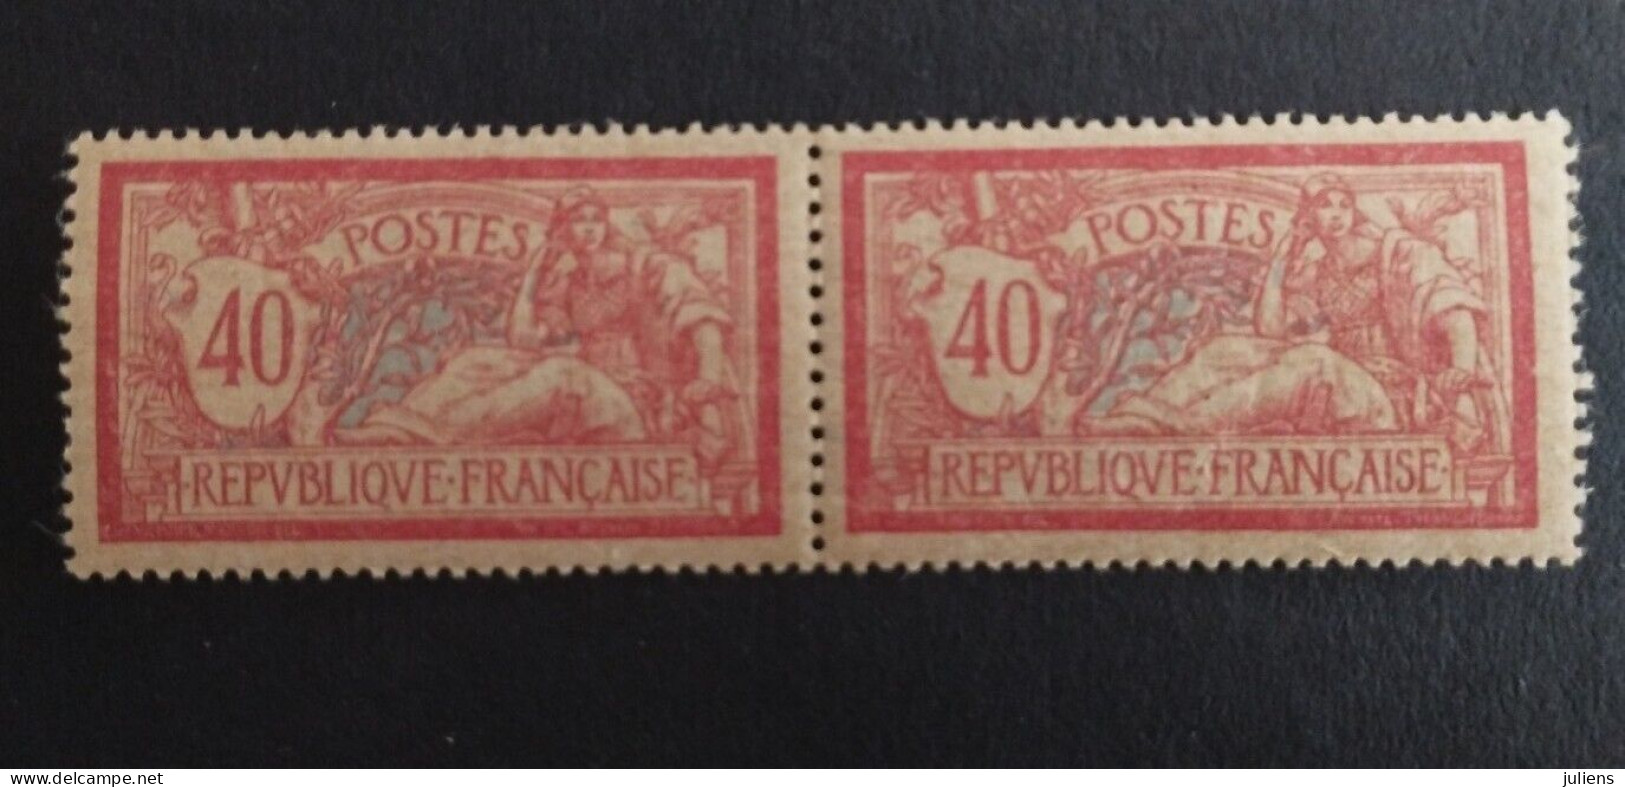 FRANCE TIMBRE TYPE MERSON 119 PAPIER GC EN PAIRE NEUF** MNH LUXE Cote +160€ #278 - Unused Stamps